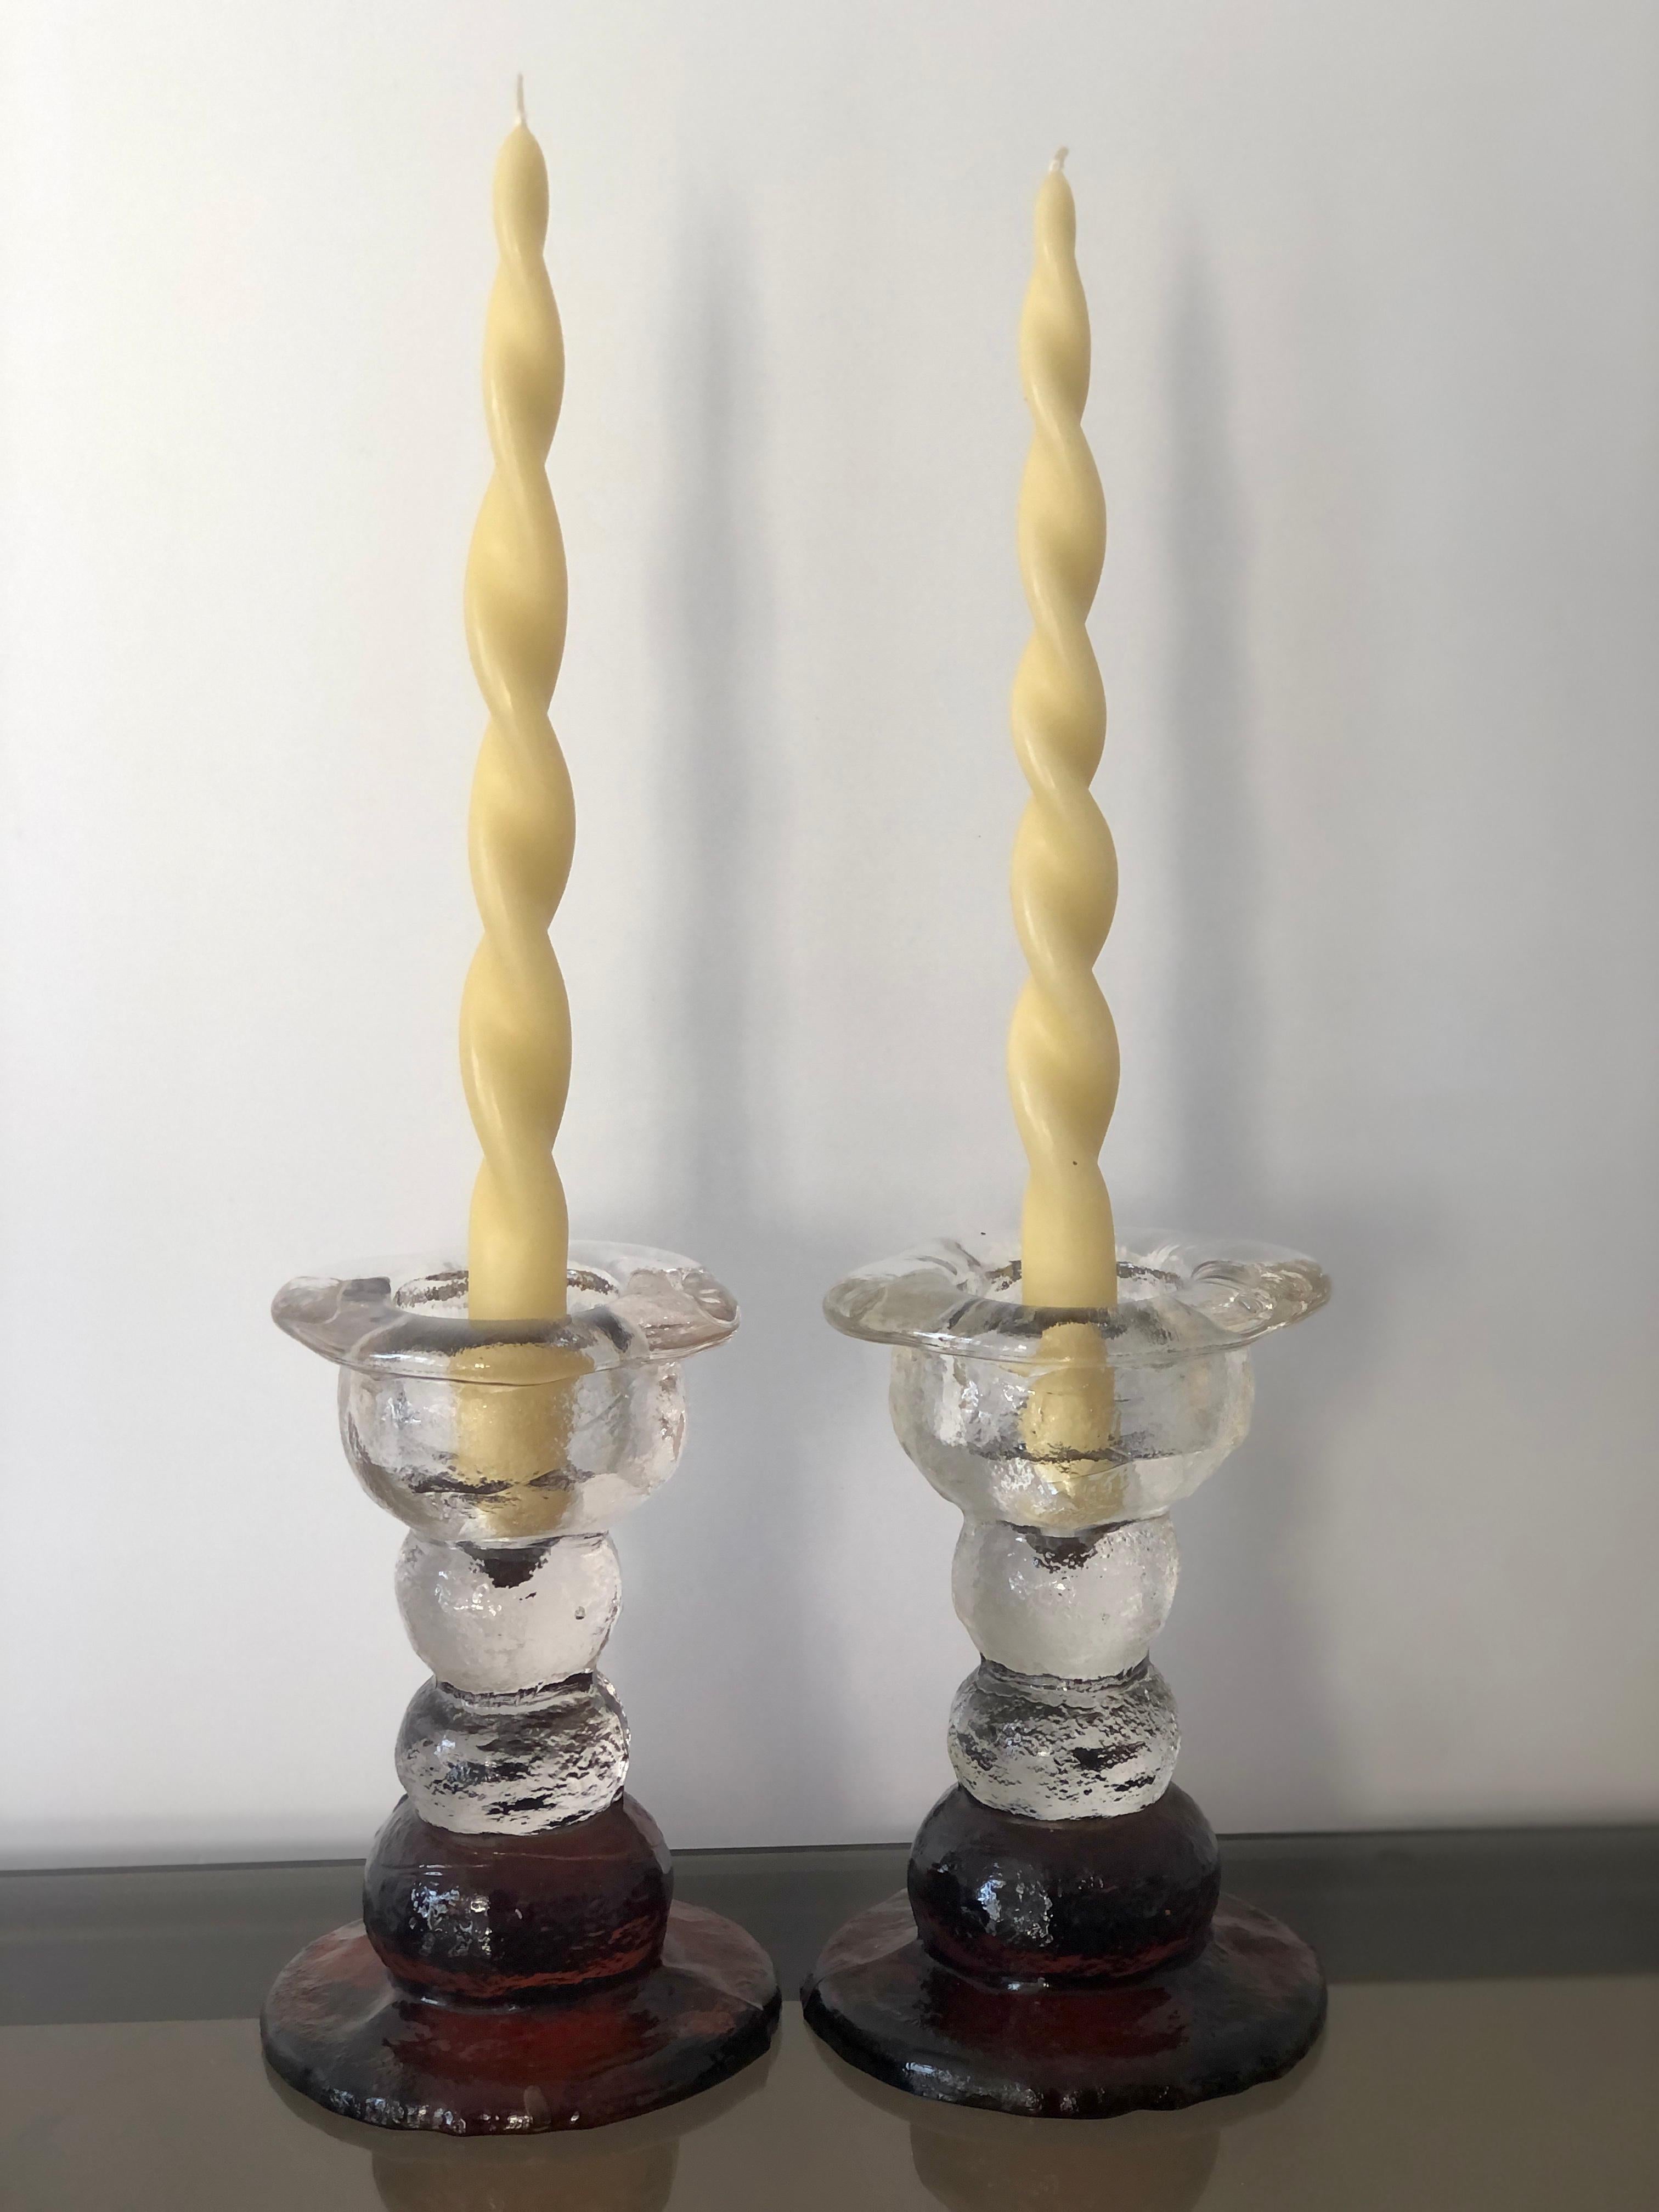 Molded 1970s Brutalist Candlesticks by Pertti Santalahti for Humppila, Finland For Sale